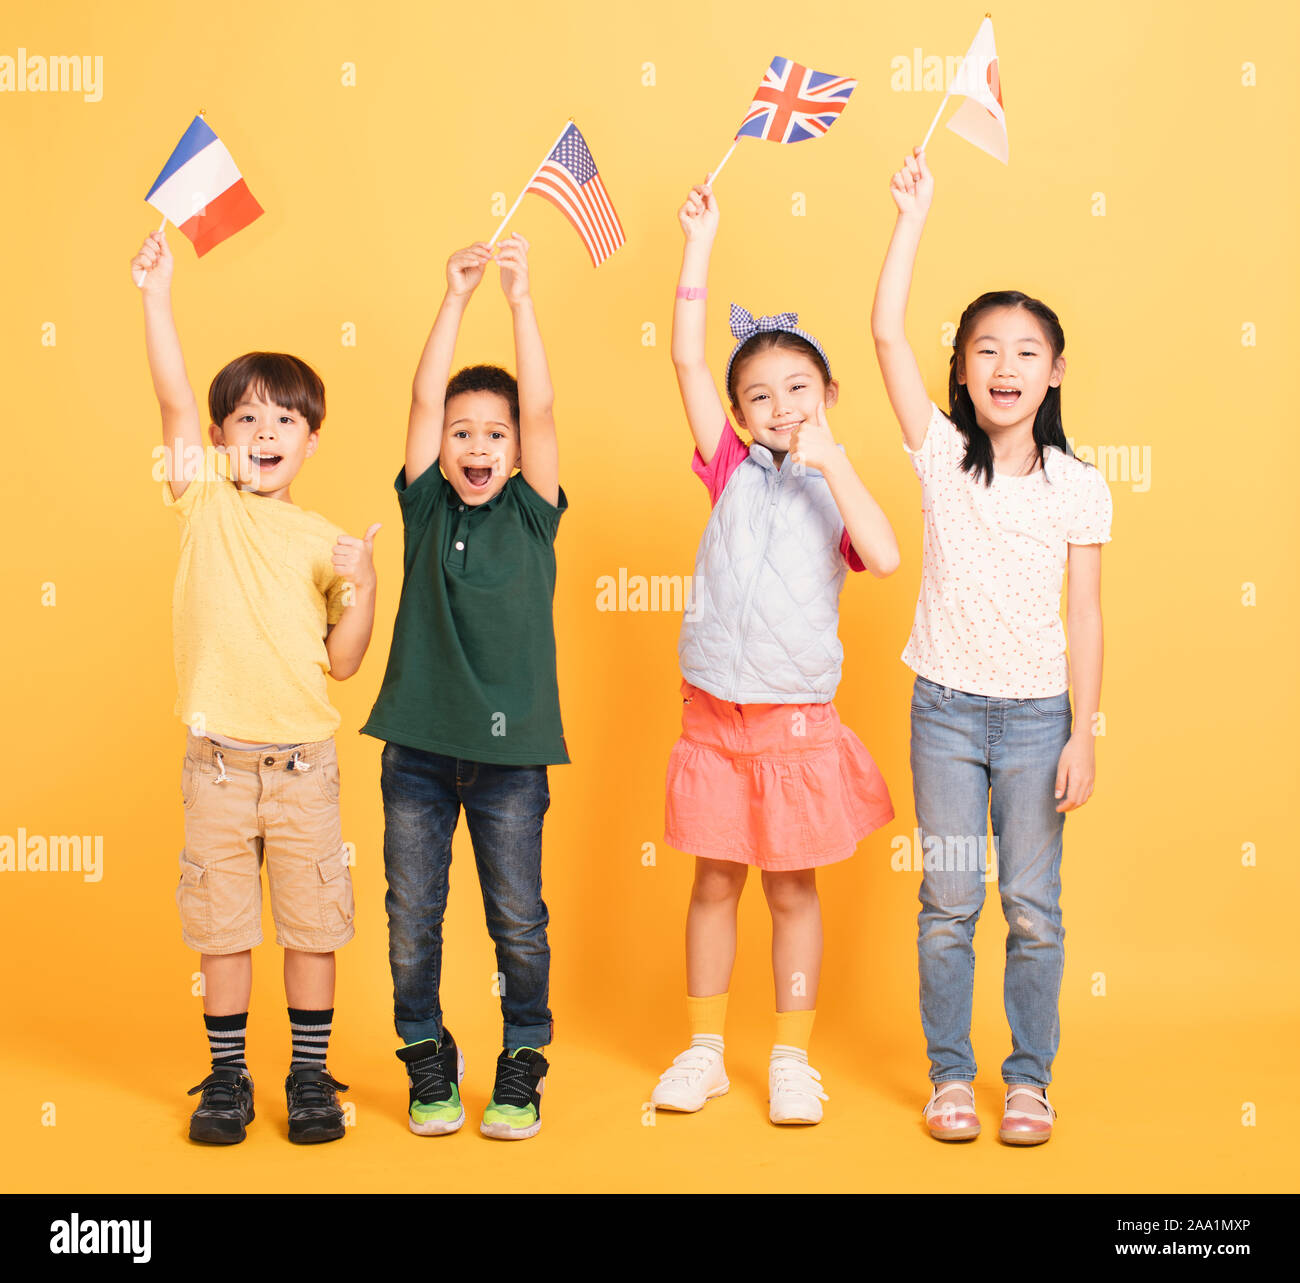 Group of happy kids showing the flags Stock Photo